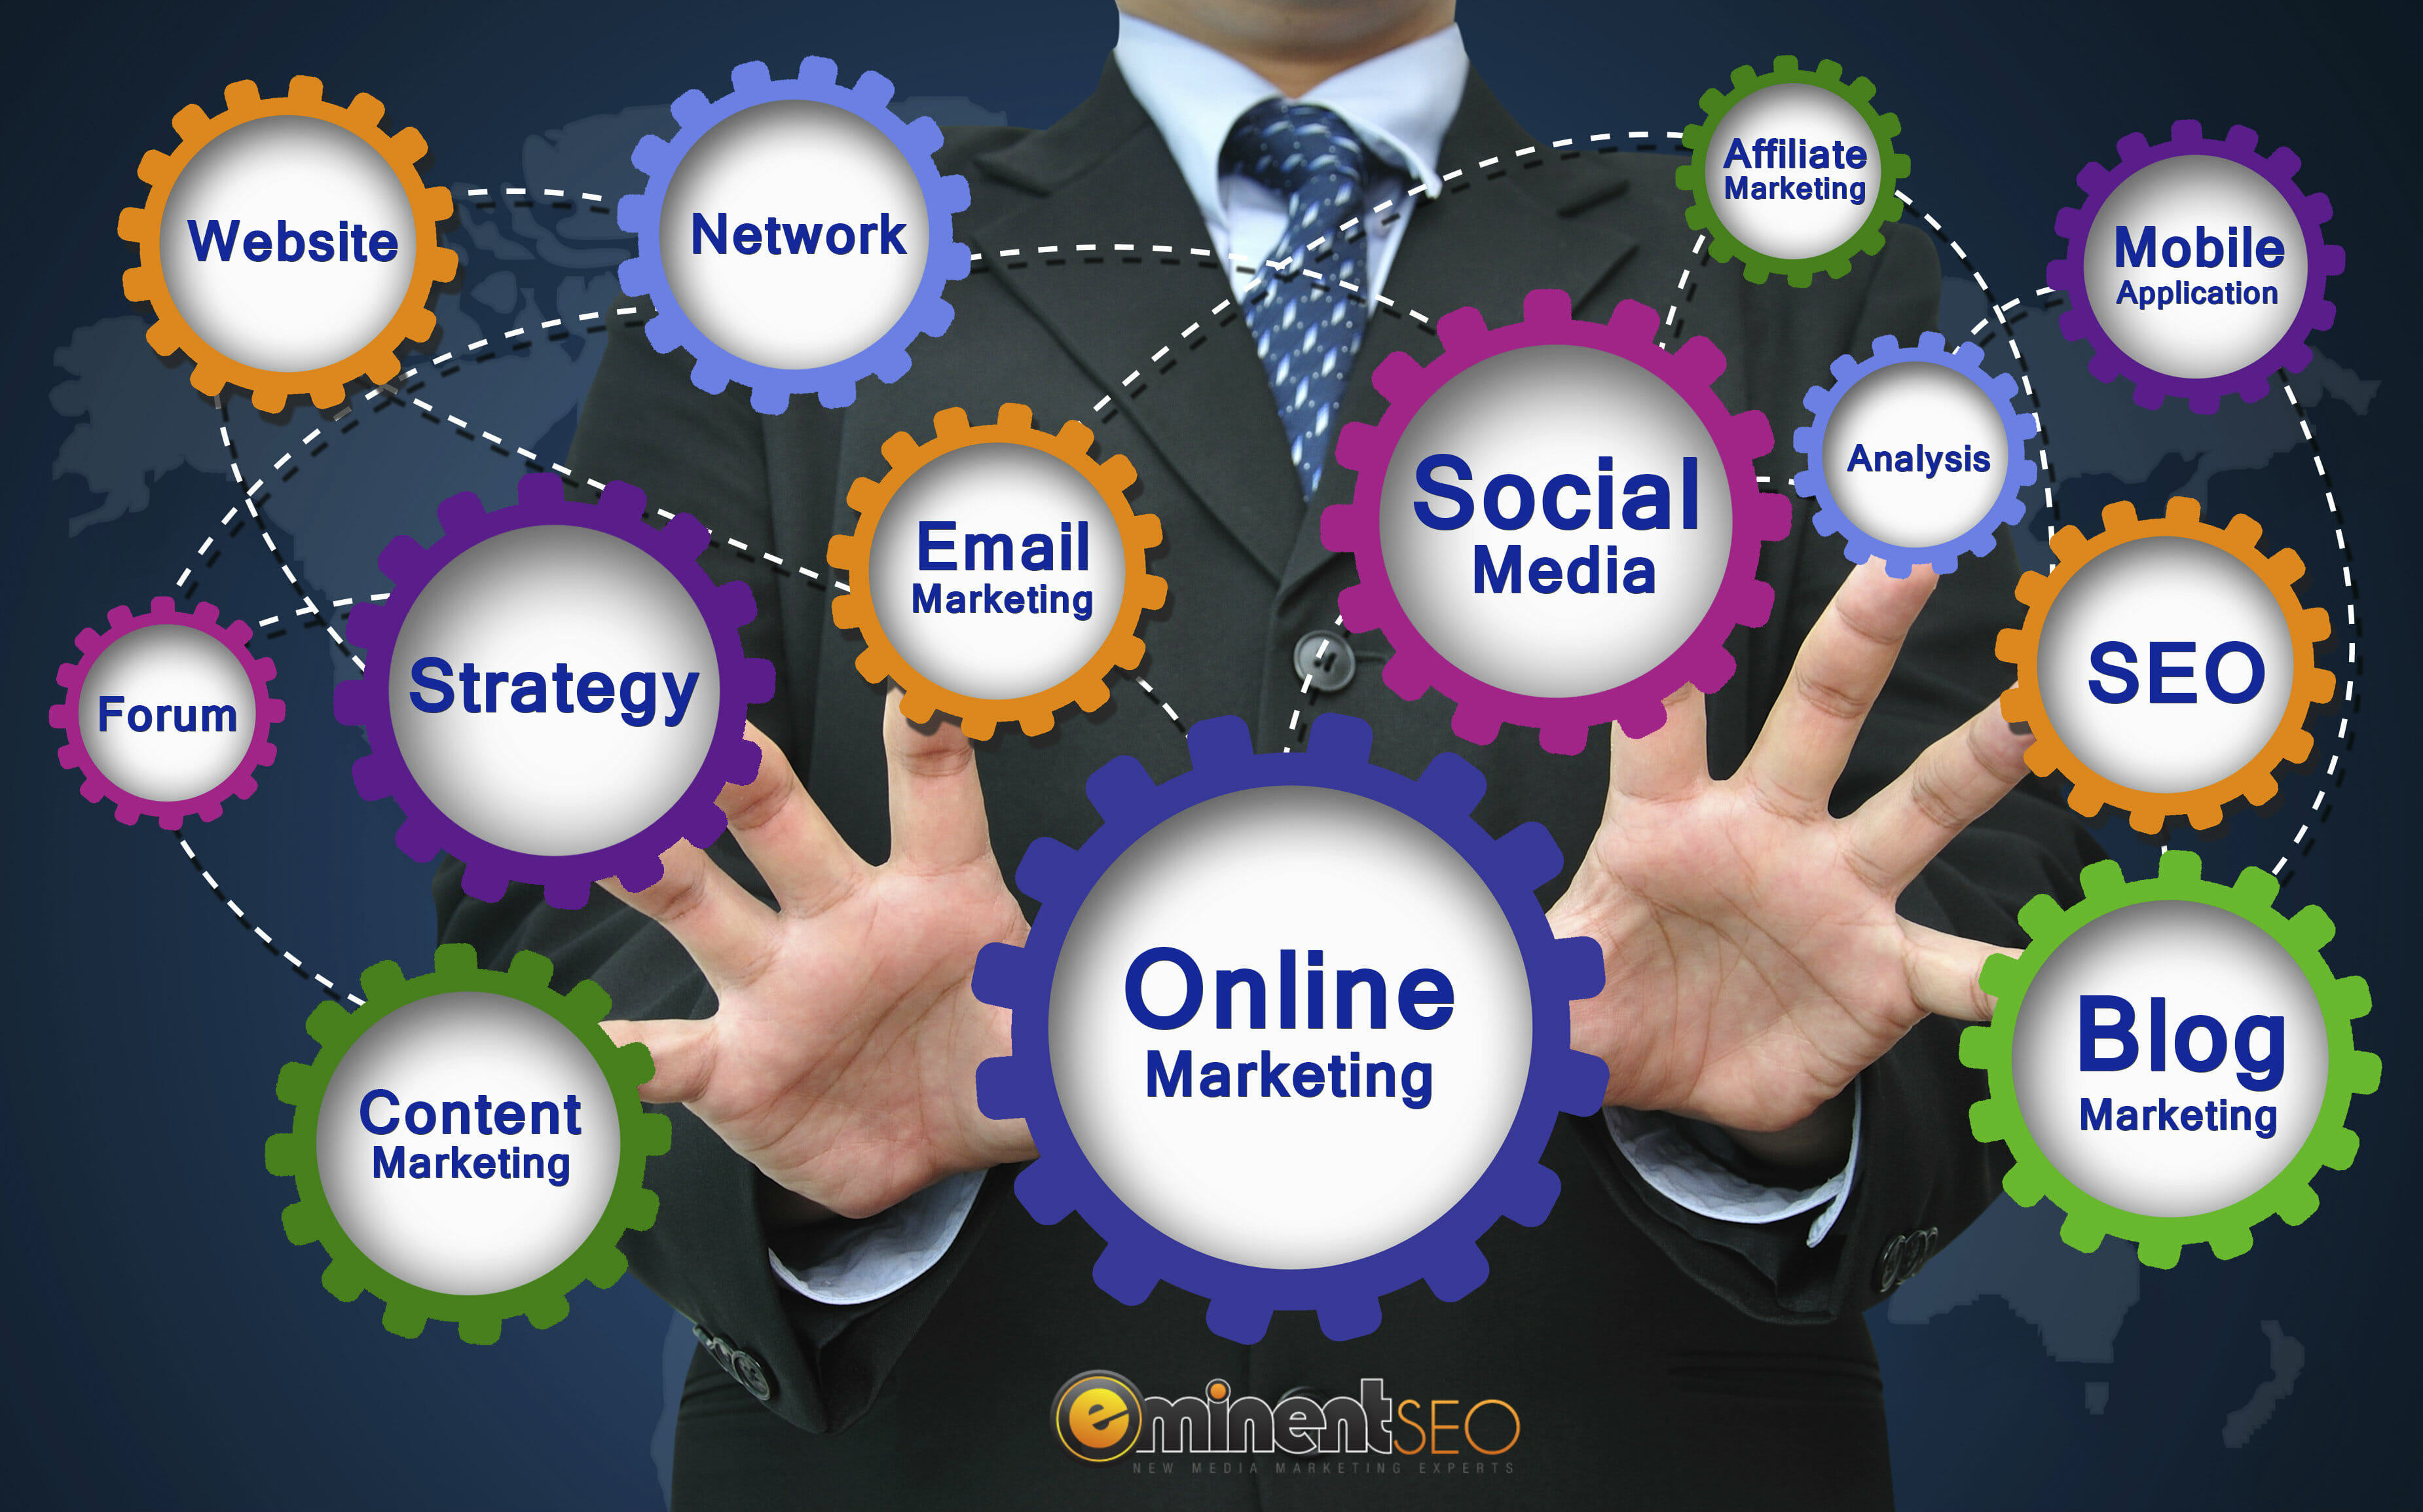 6 Reasons Your Small Business Needs Website Marketing Services